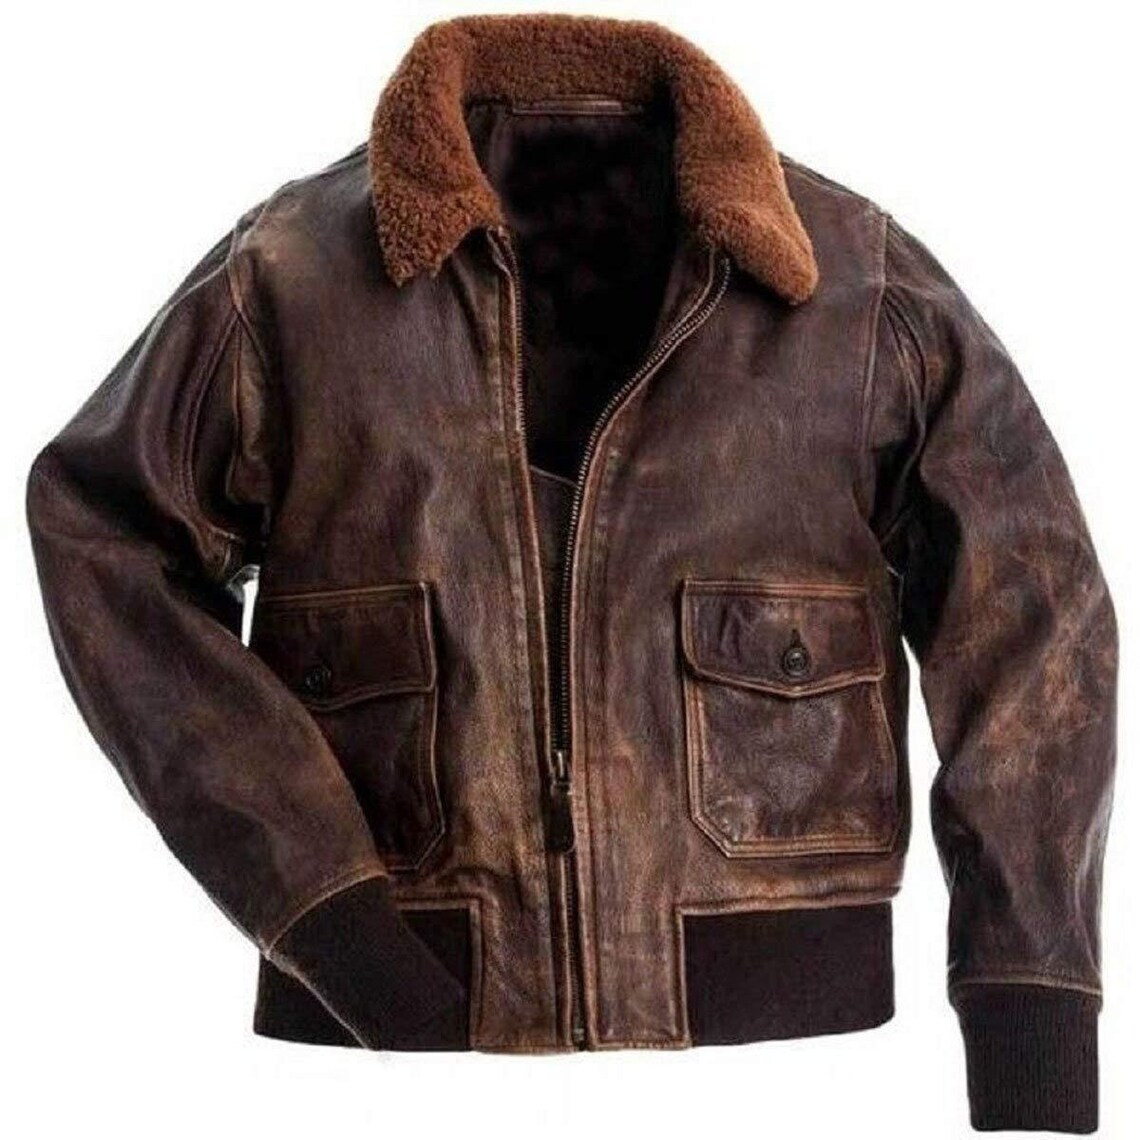 Aviator G-1 A-2 Flight Jacket Distressed Brown Real Bomber - Etsy